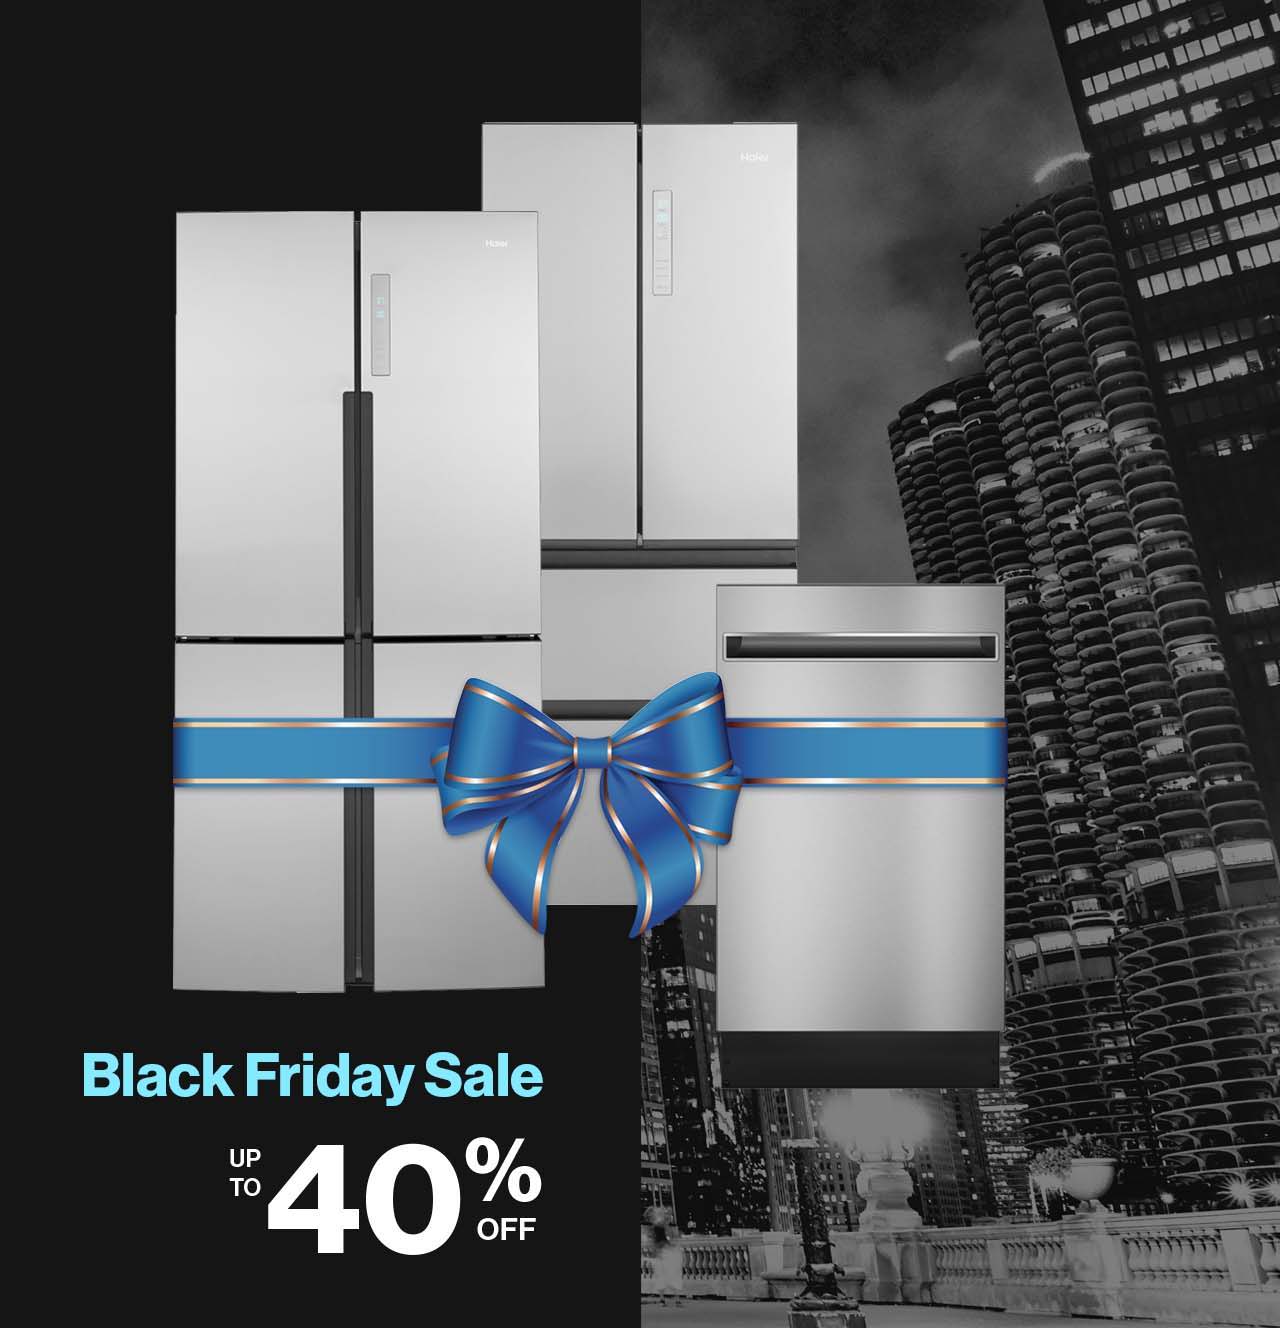 Haier Black Friday Sale. Save up to 40% off small-space kitchen appliances.